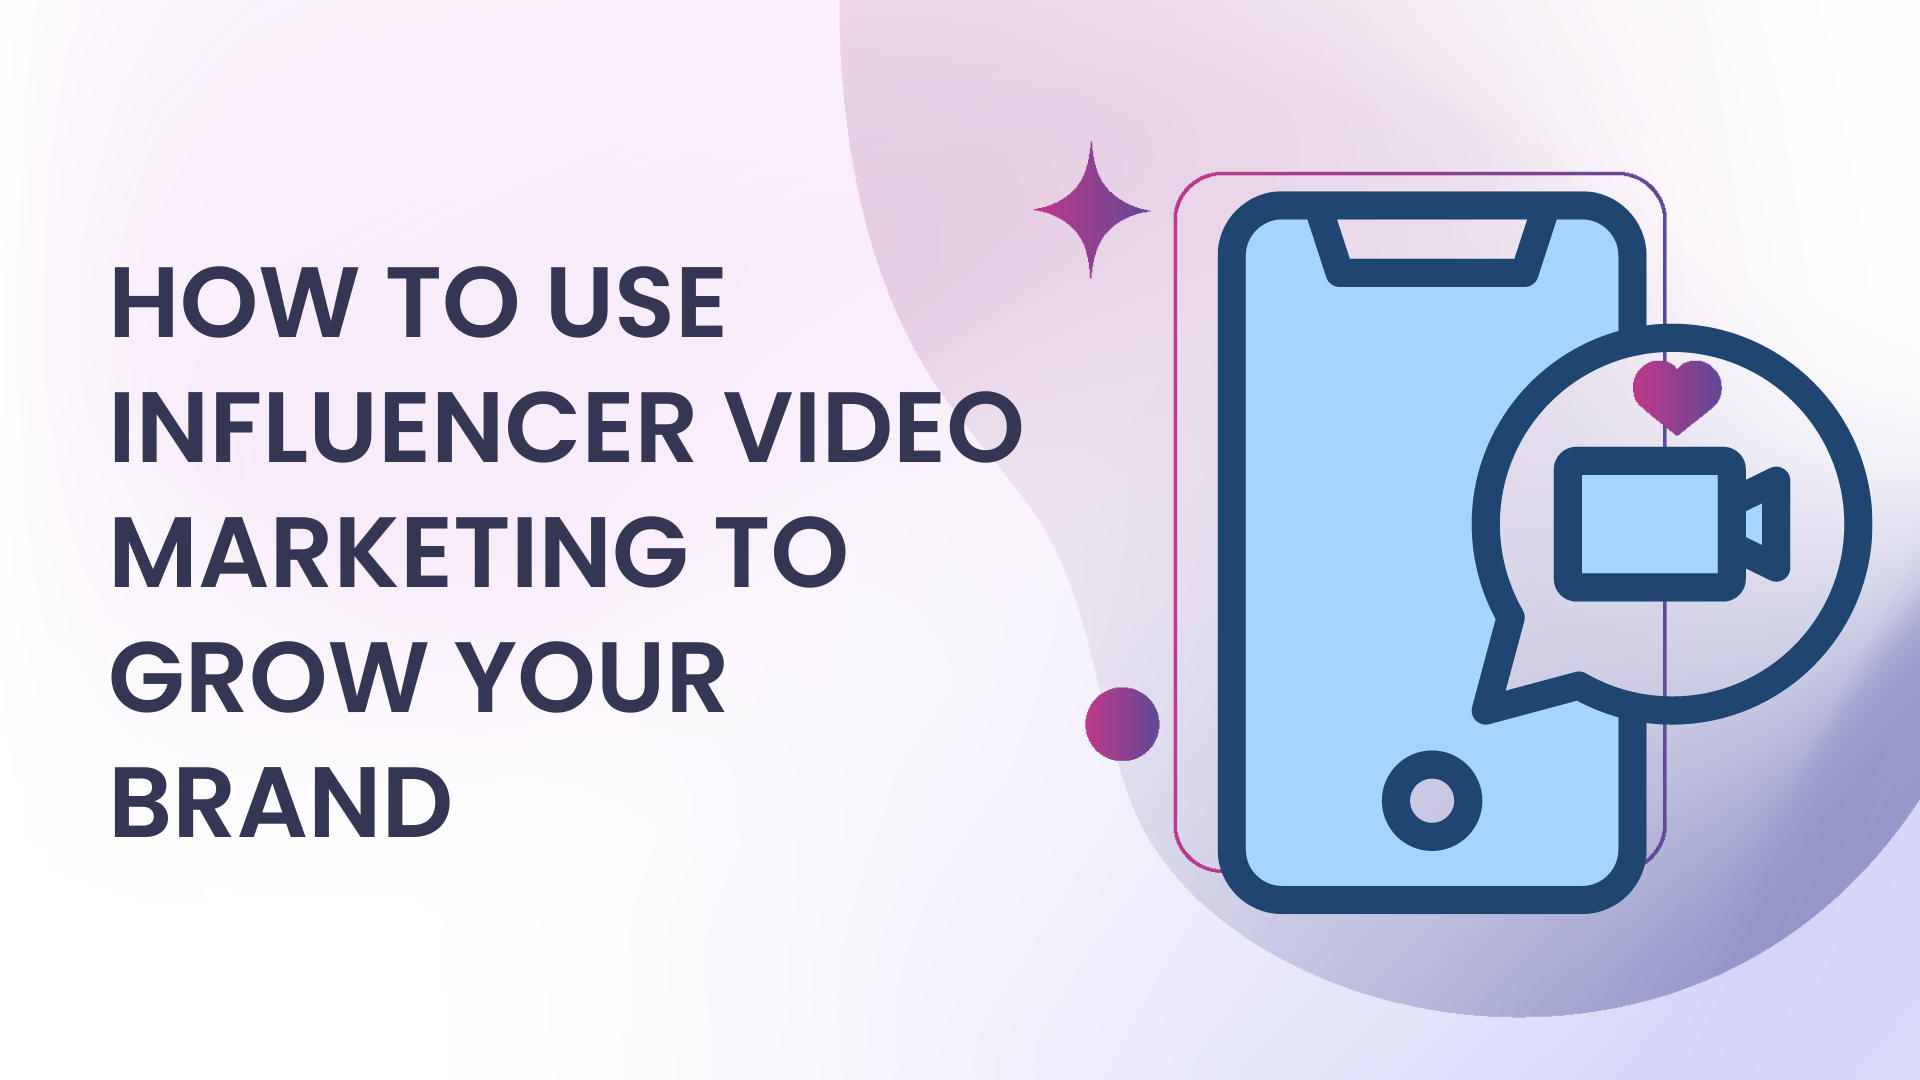 Influencer marketing with video